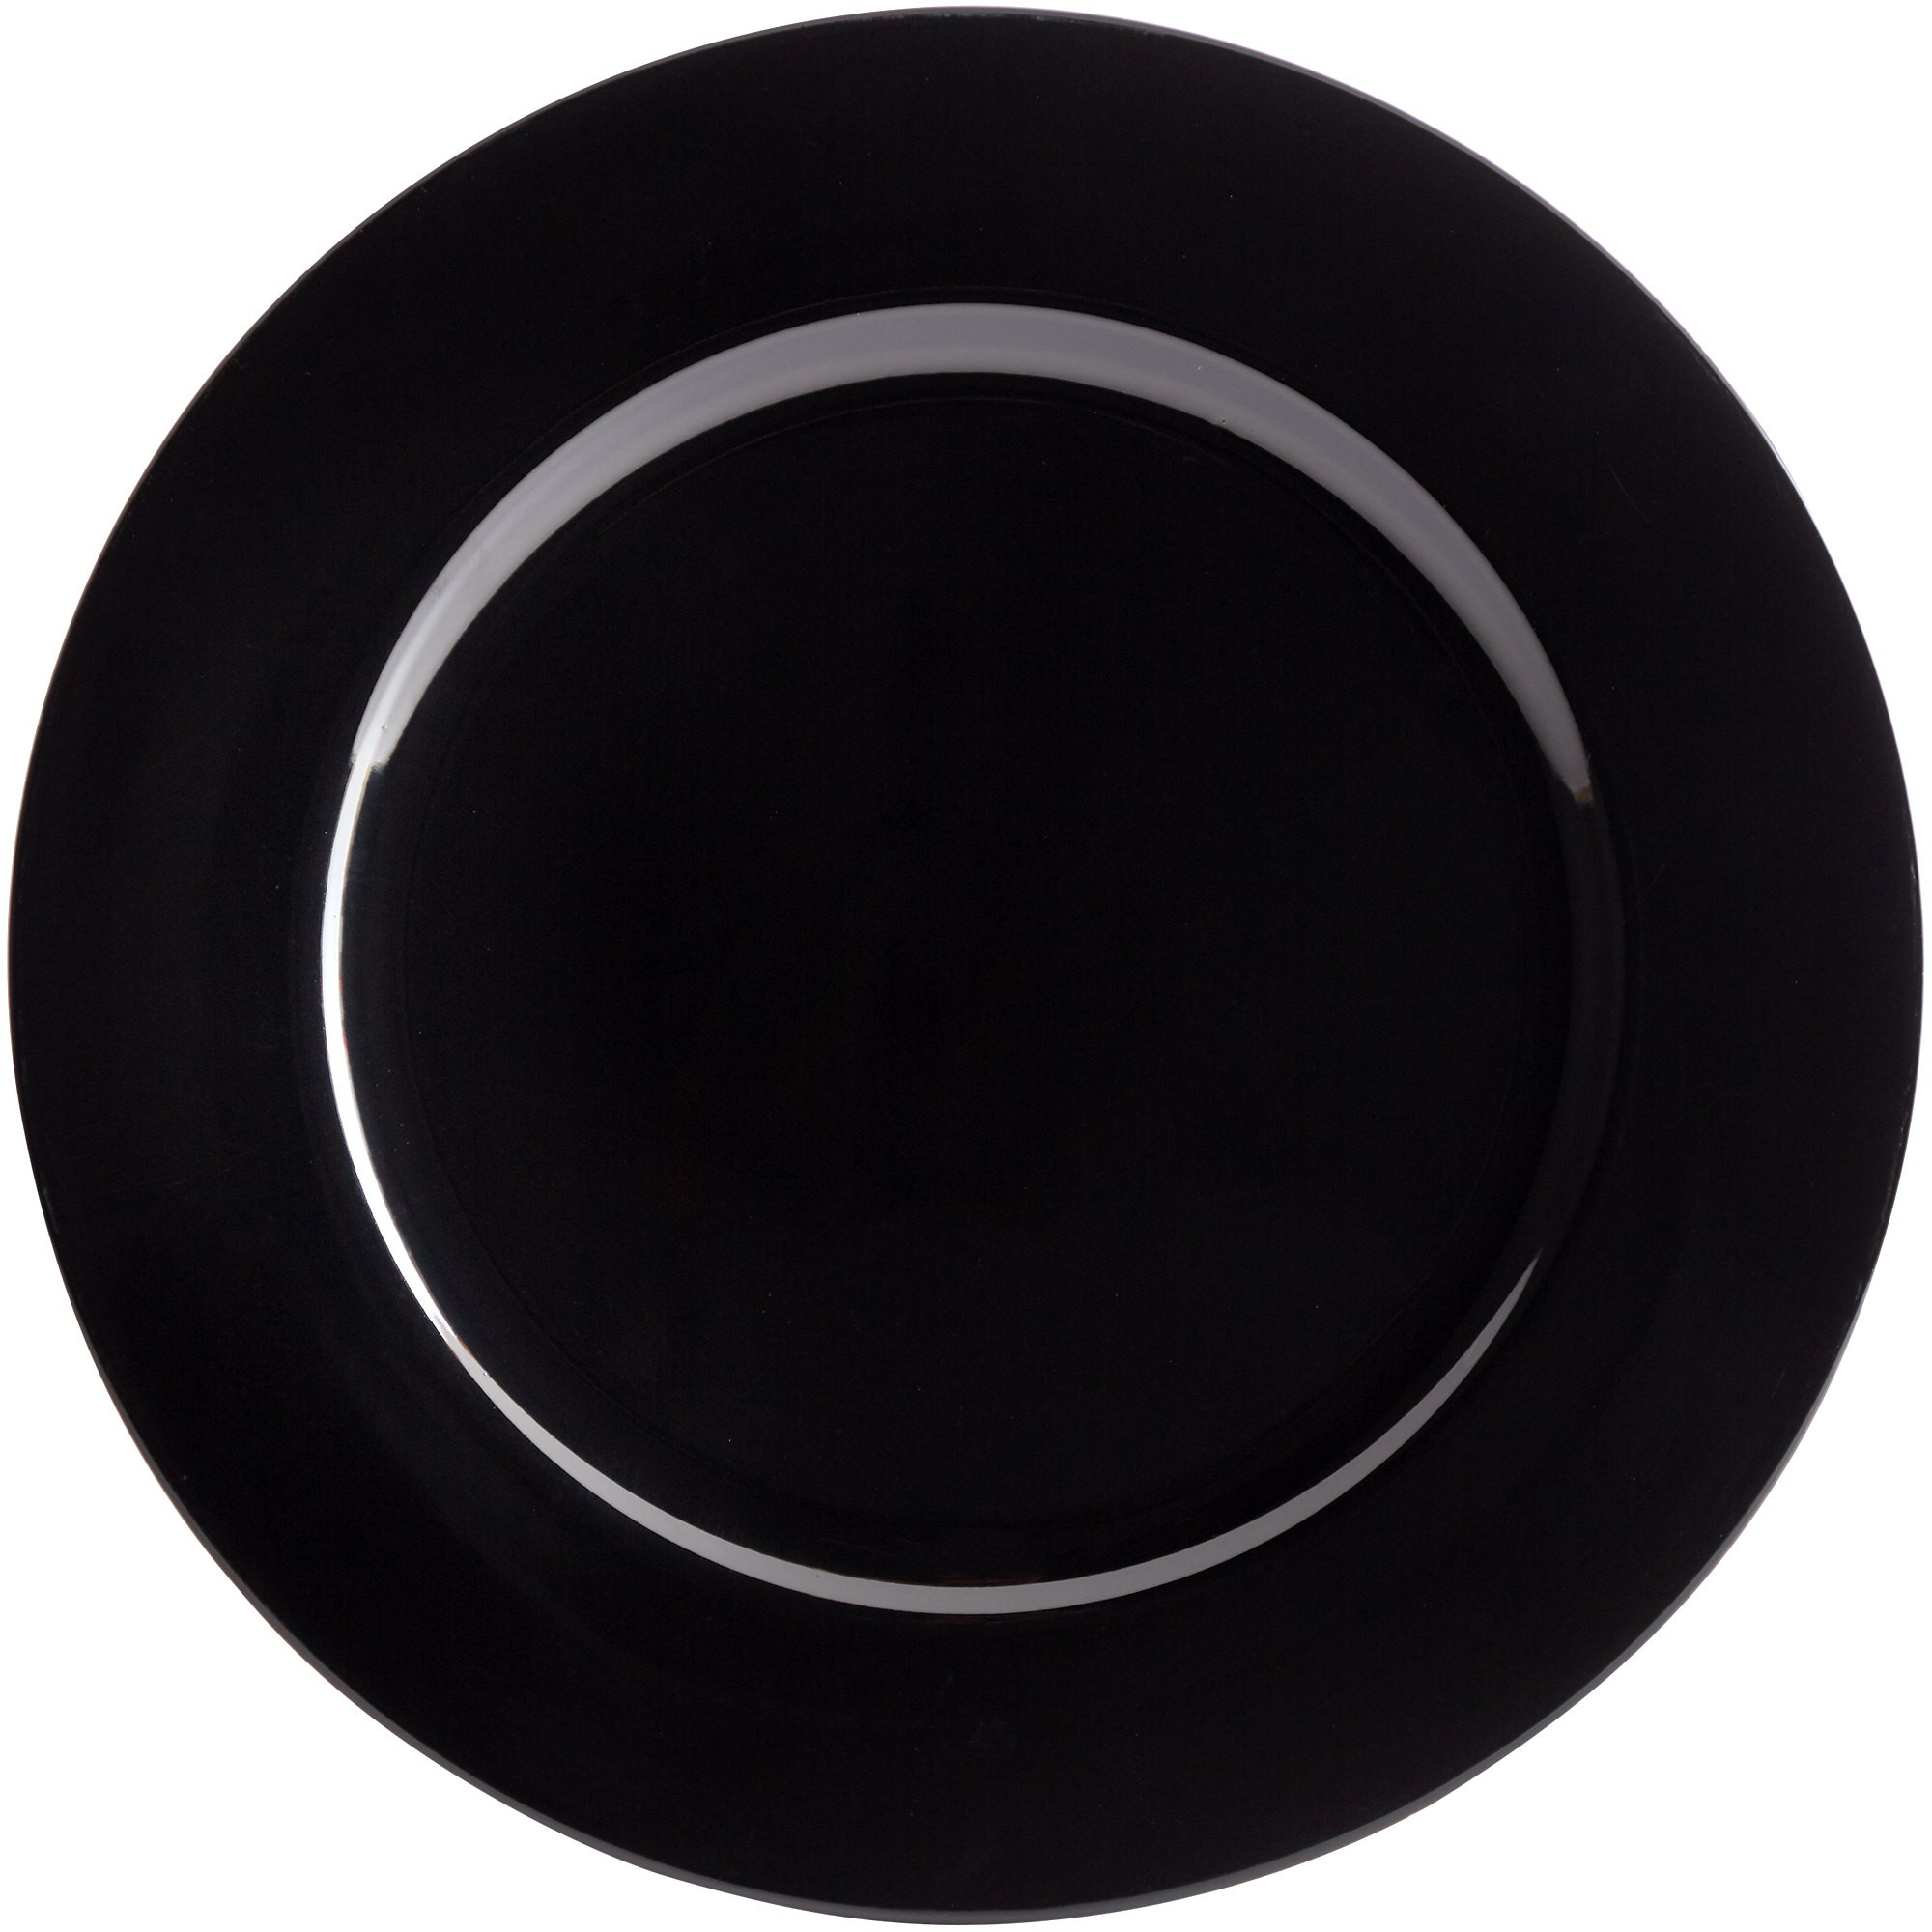 Jay Companies 1270028 Black Round Melamine 13" Charger Plate